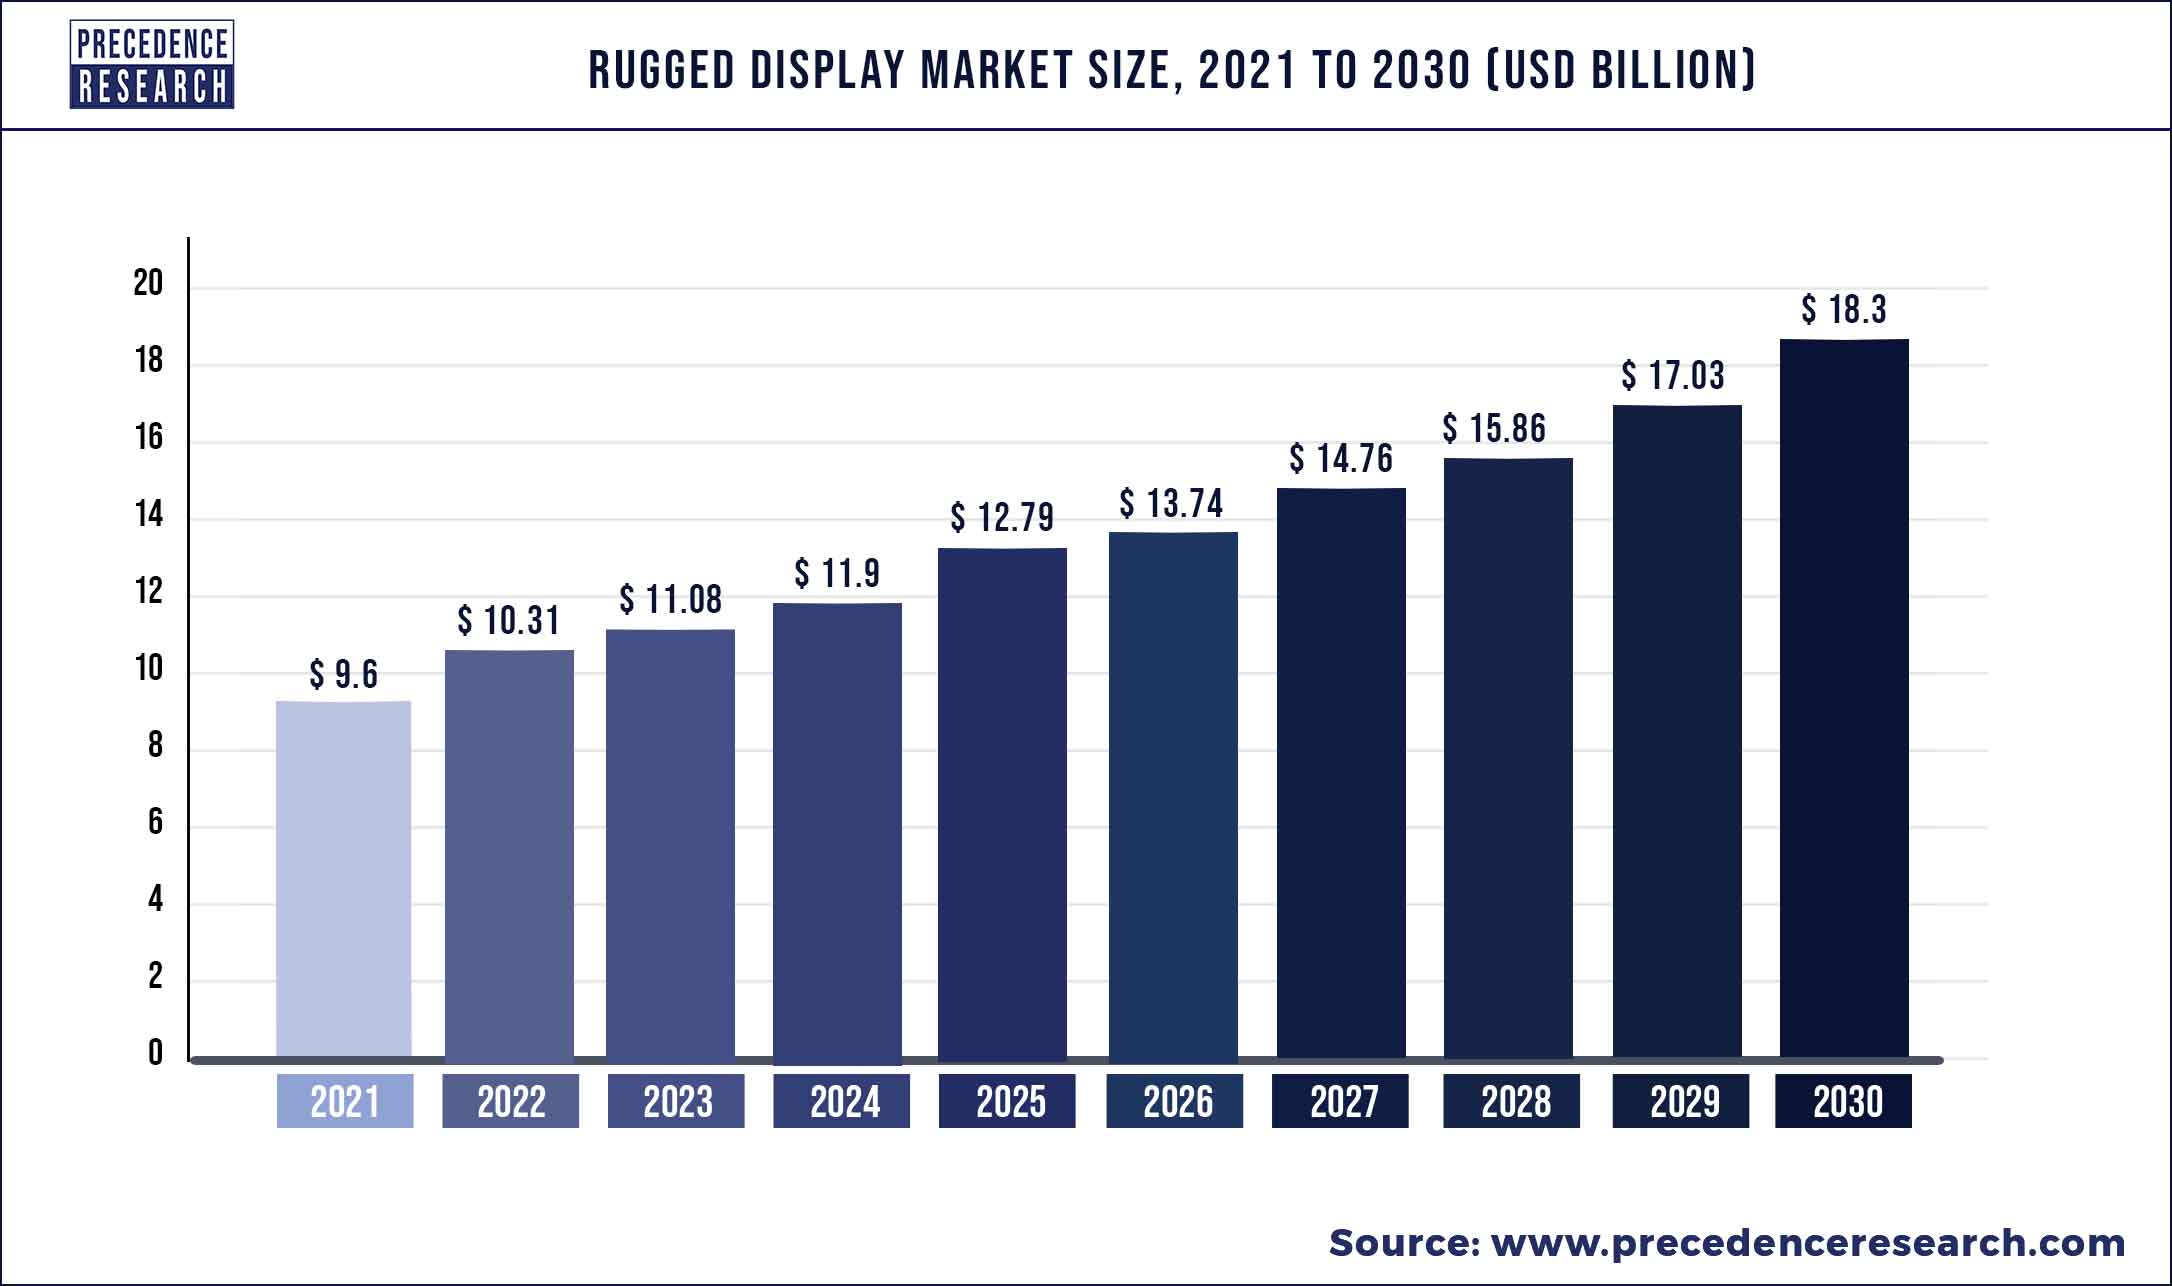 Rugged Display Market Size 2022 To 2030